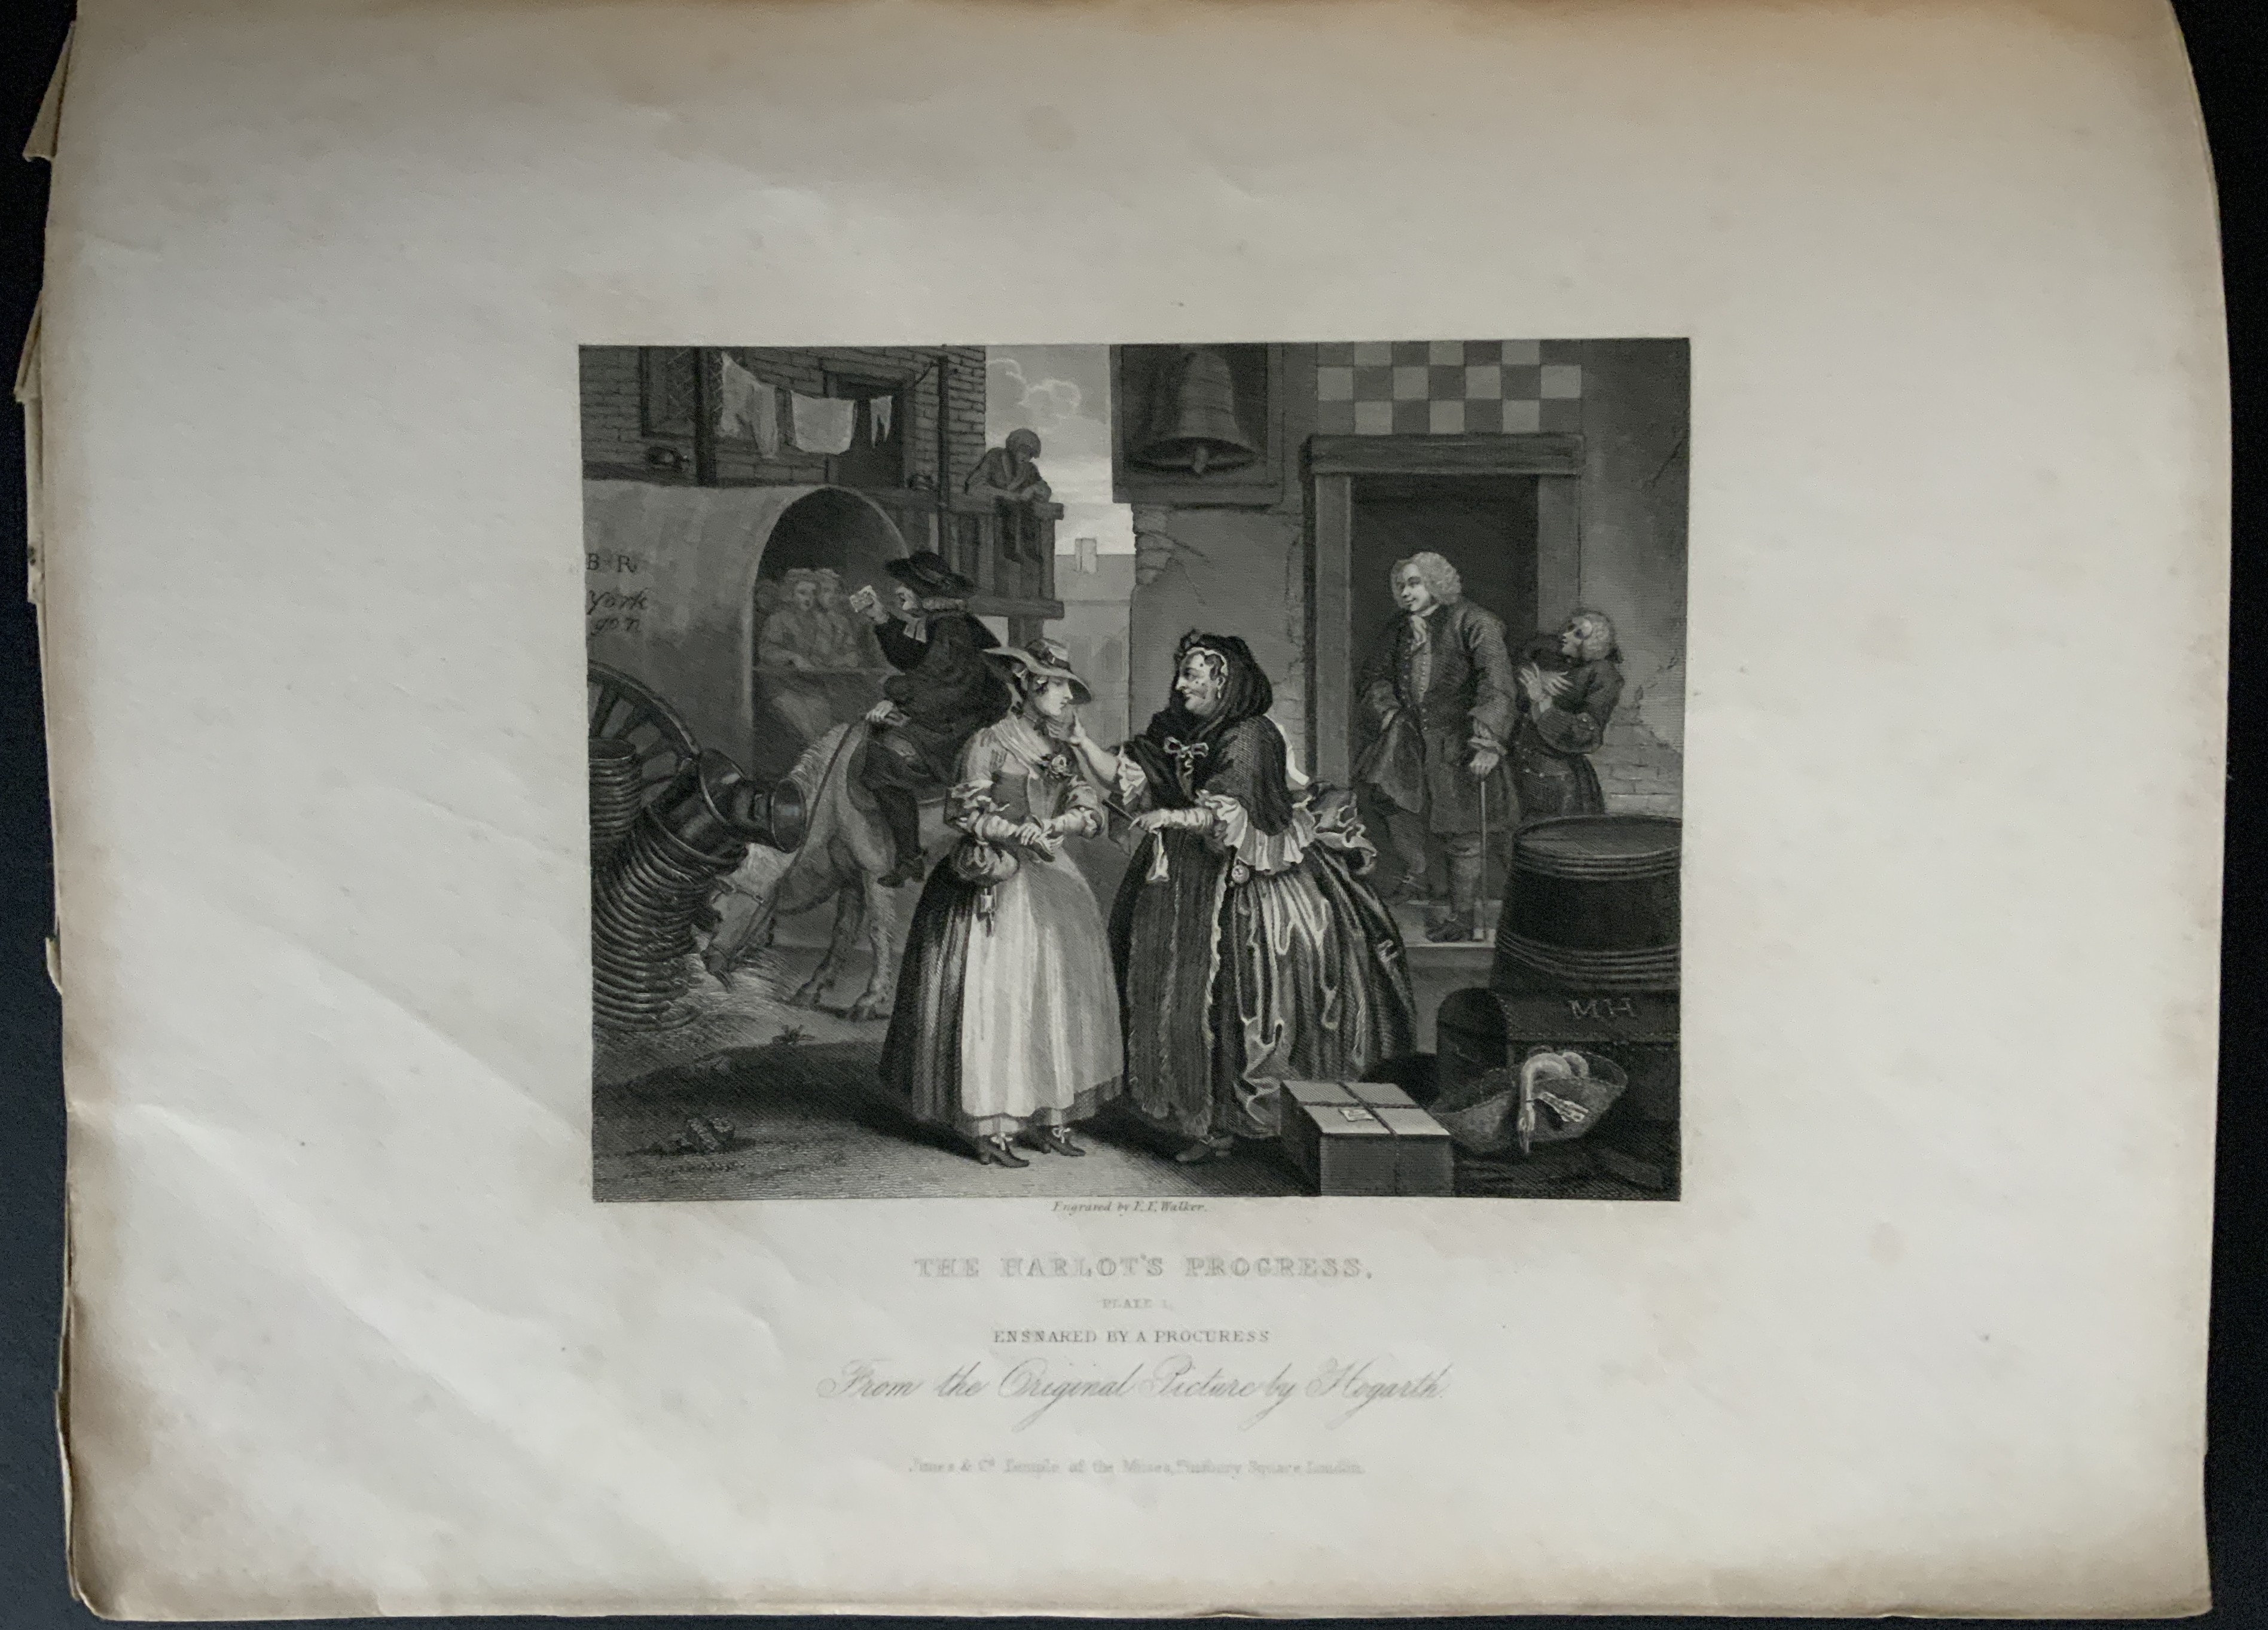 FOUR MAGAZINES OF COMMEMORATION EDITION OF THE WORKS OF WILLIAM HOGARTH IN THE SERIES OF ENGRAVINGS - Image 8 of 8